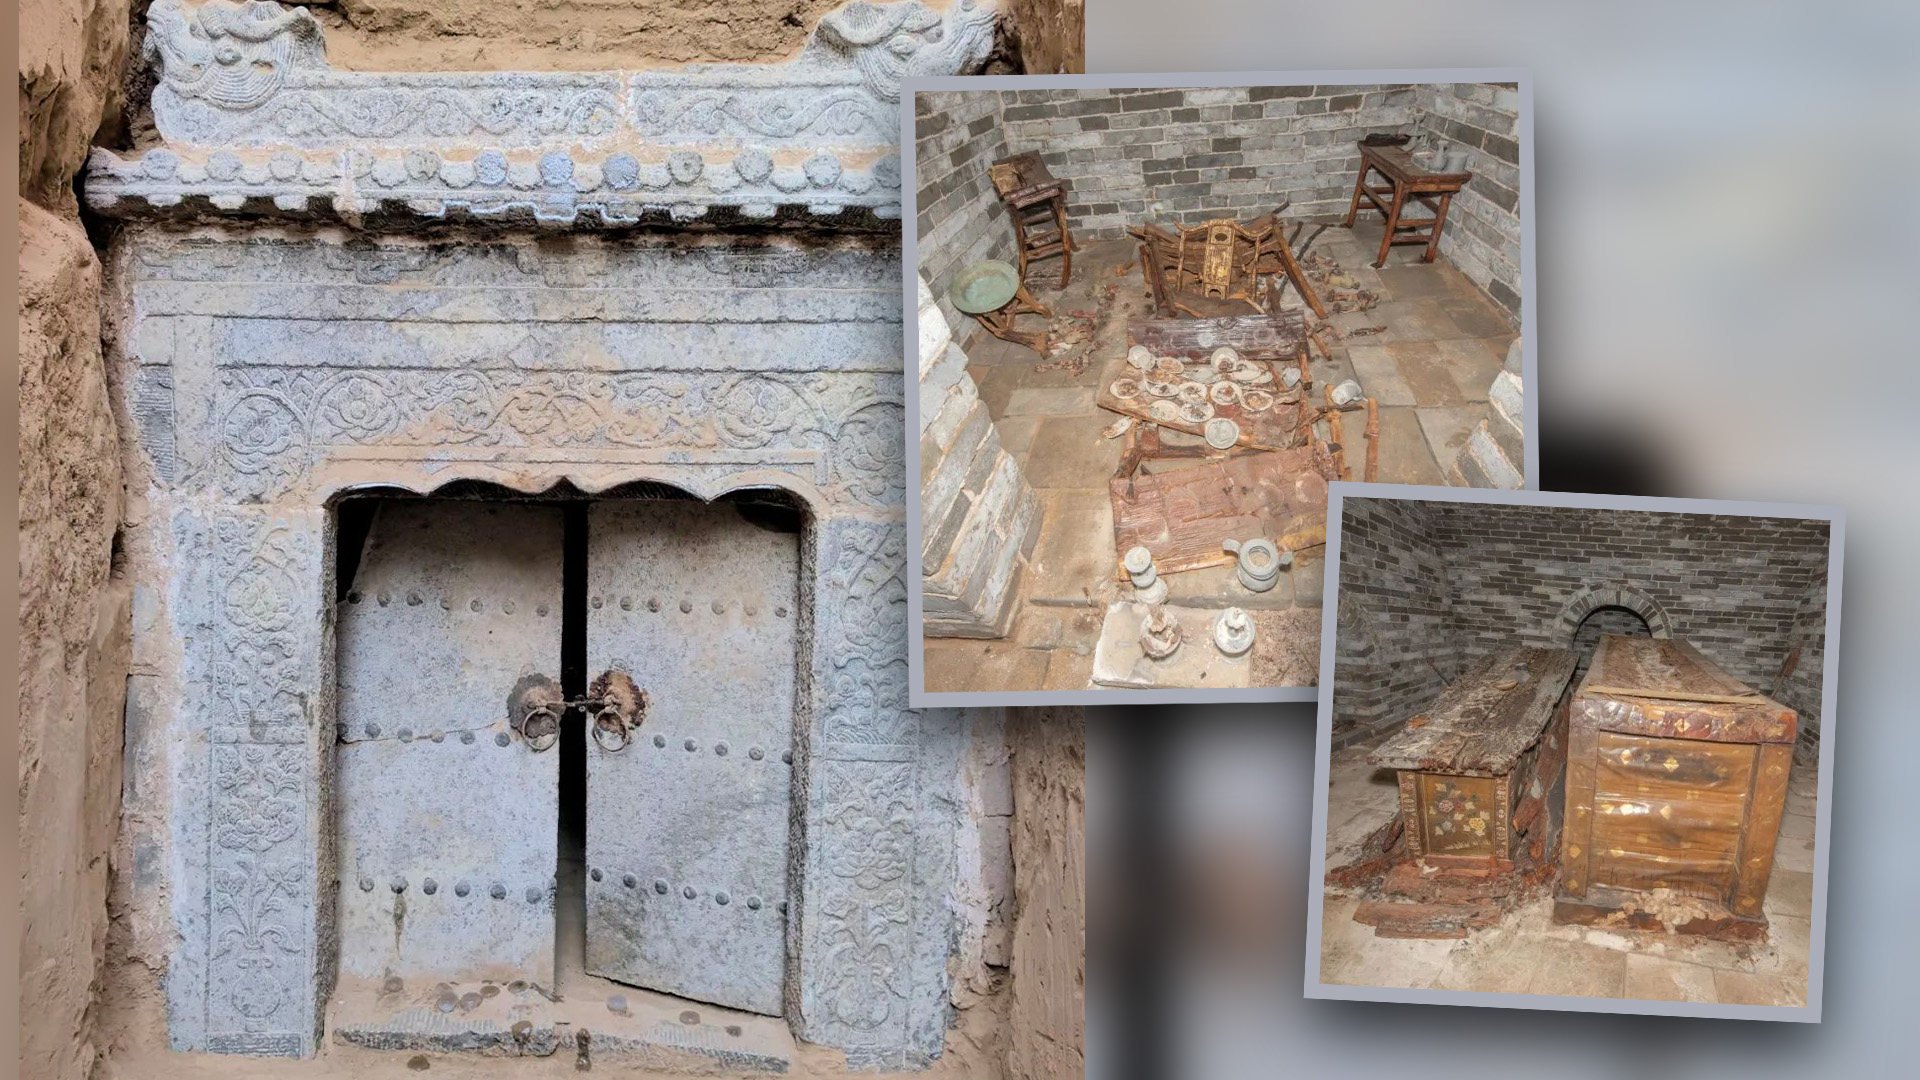 The Ming dynasty tomb of a high-ranking eunuch features beautifully preserved ornate artwork, funerary sacrifices, and a gorgeous doorway. Photo: SCMP composite/Shanxi Provincial Institute of Archaeology